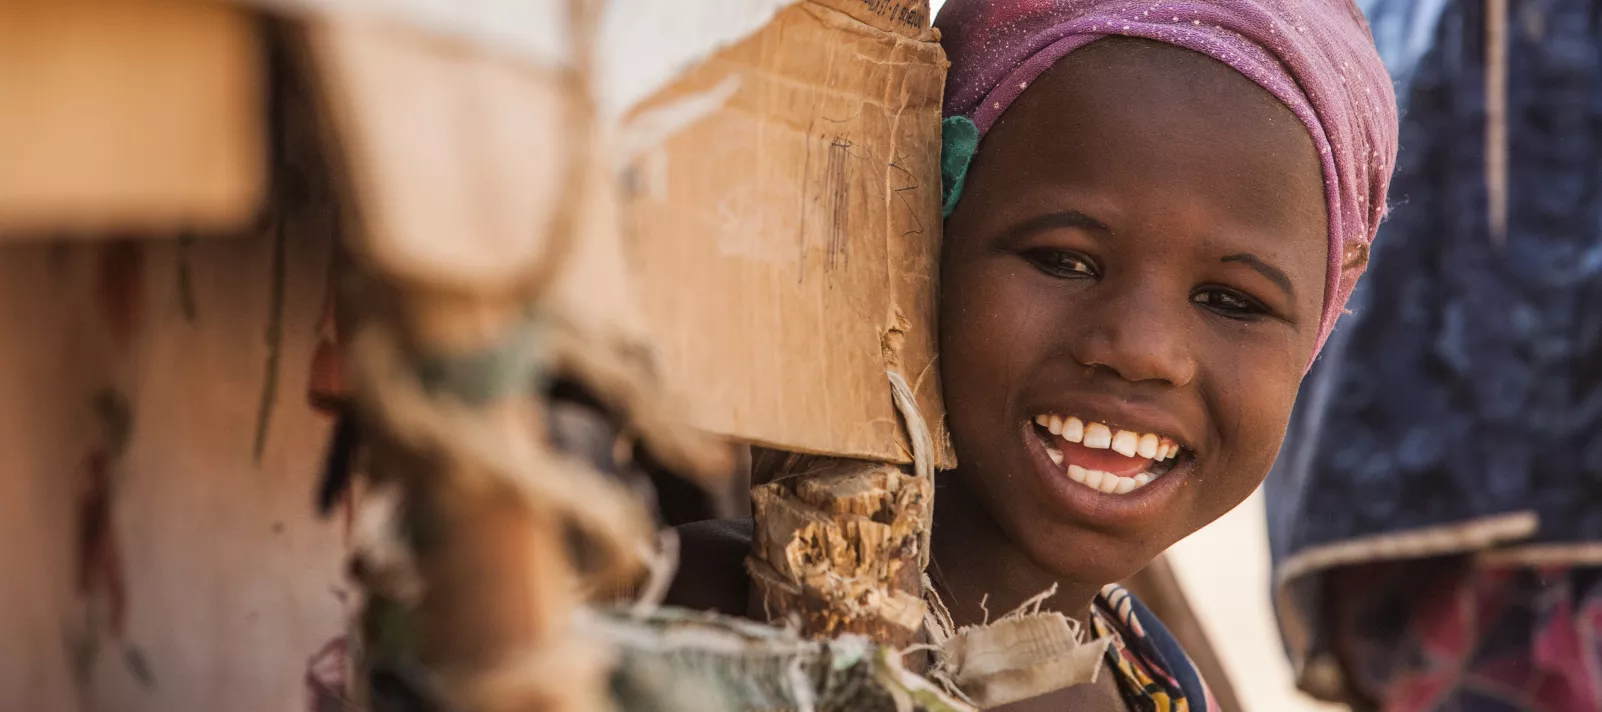 As a global child rights organization that works in 190 countries and territories, we inspire and achieve lasting impact for girls and boys in Niger.